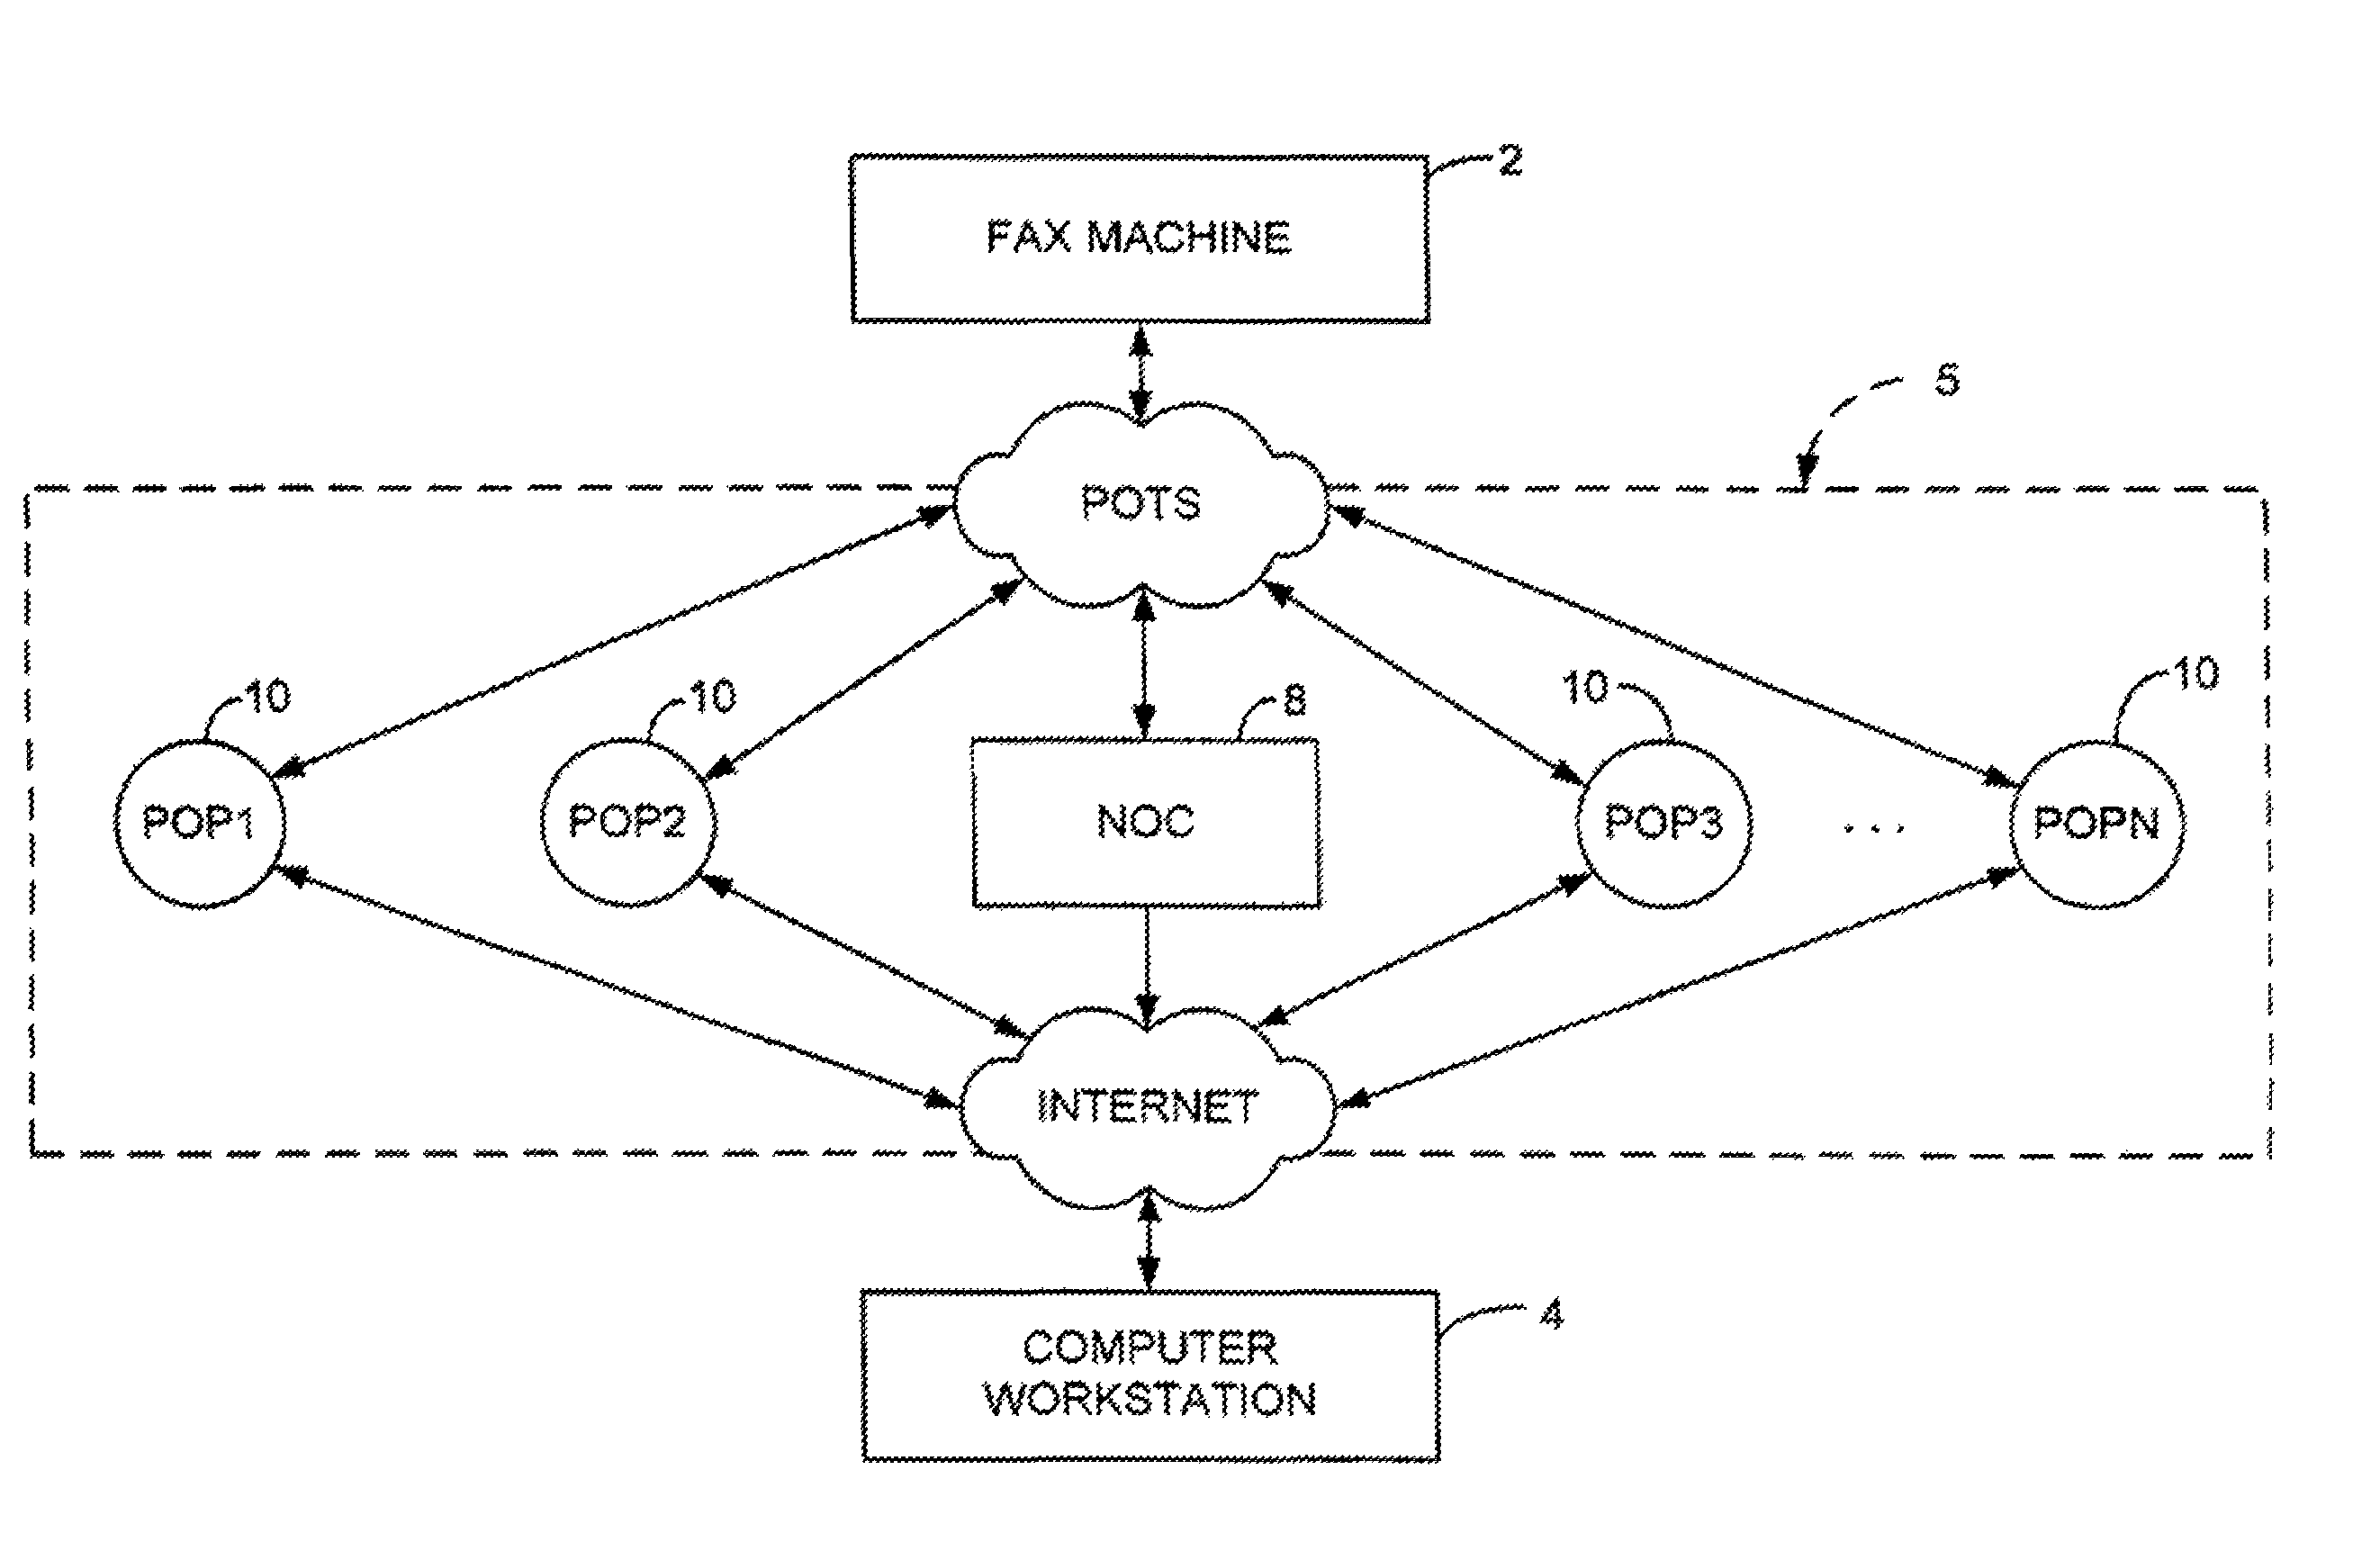 Methods and apparatus for secure facsimile transmissions to electronic storage destinations